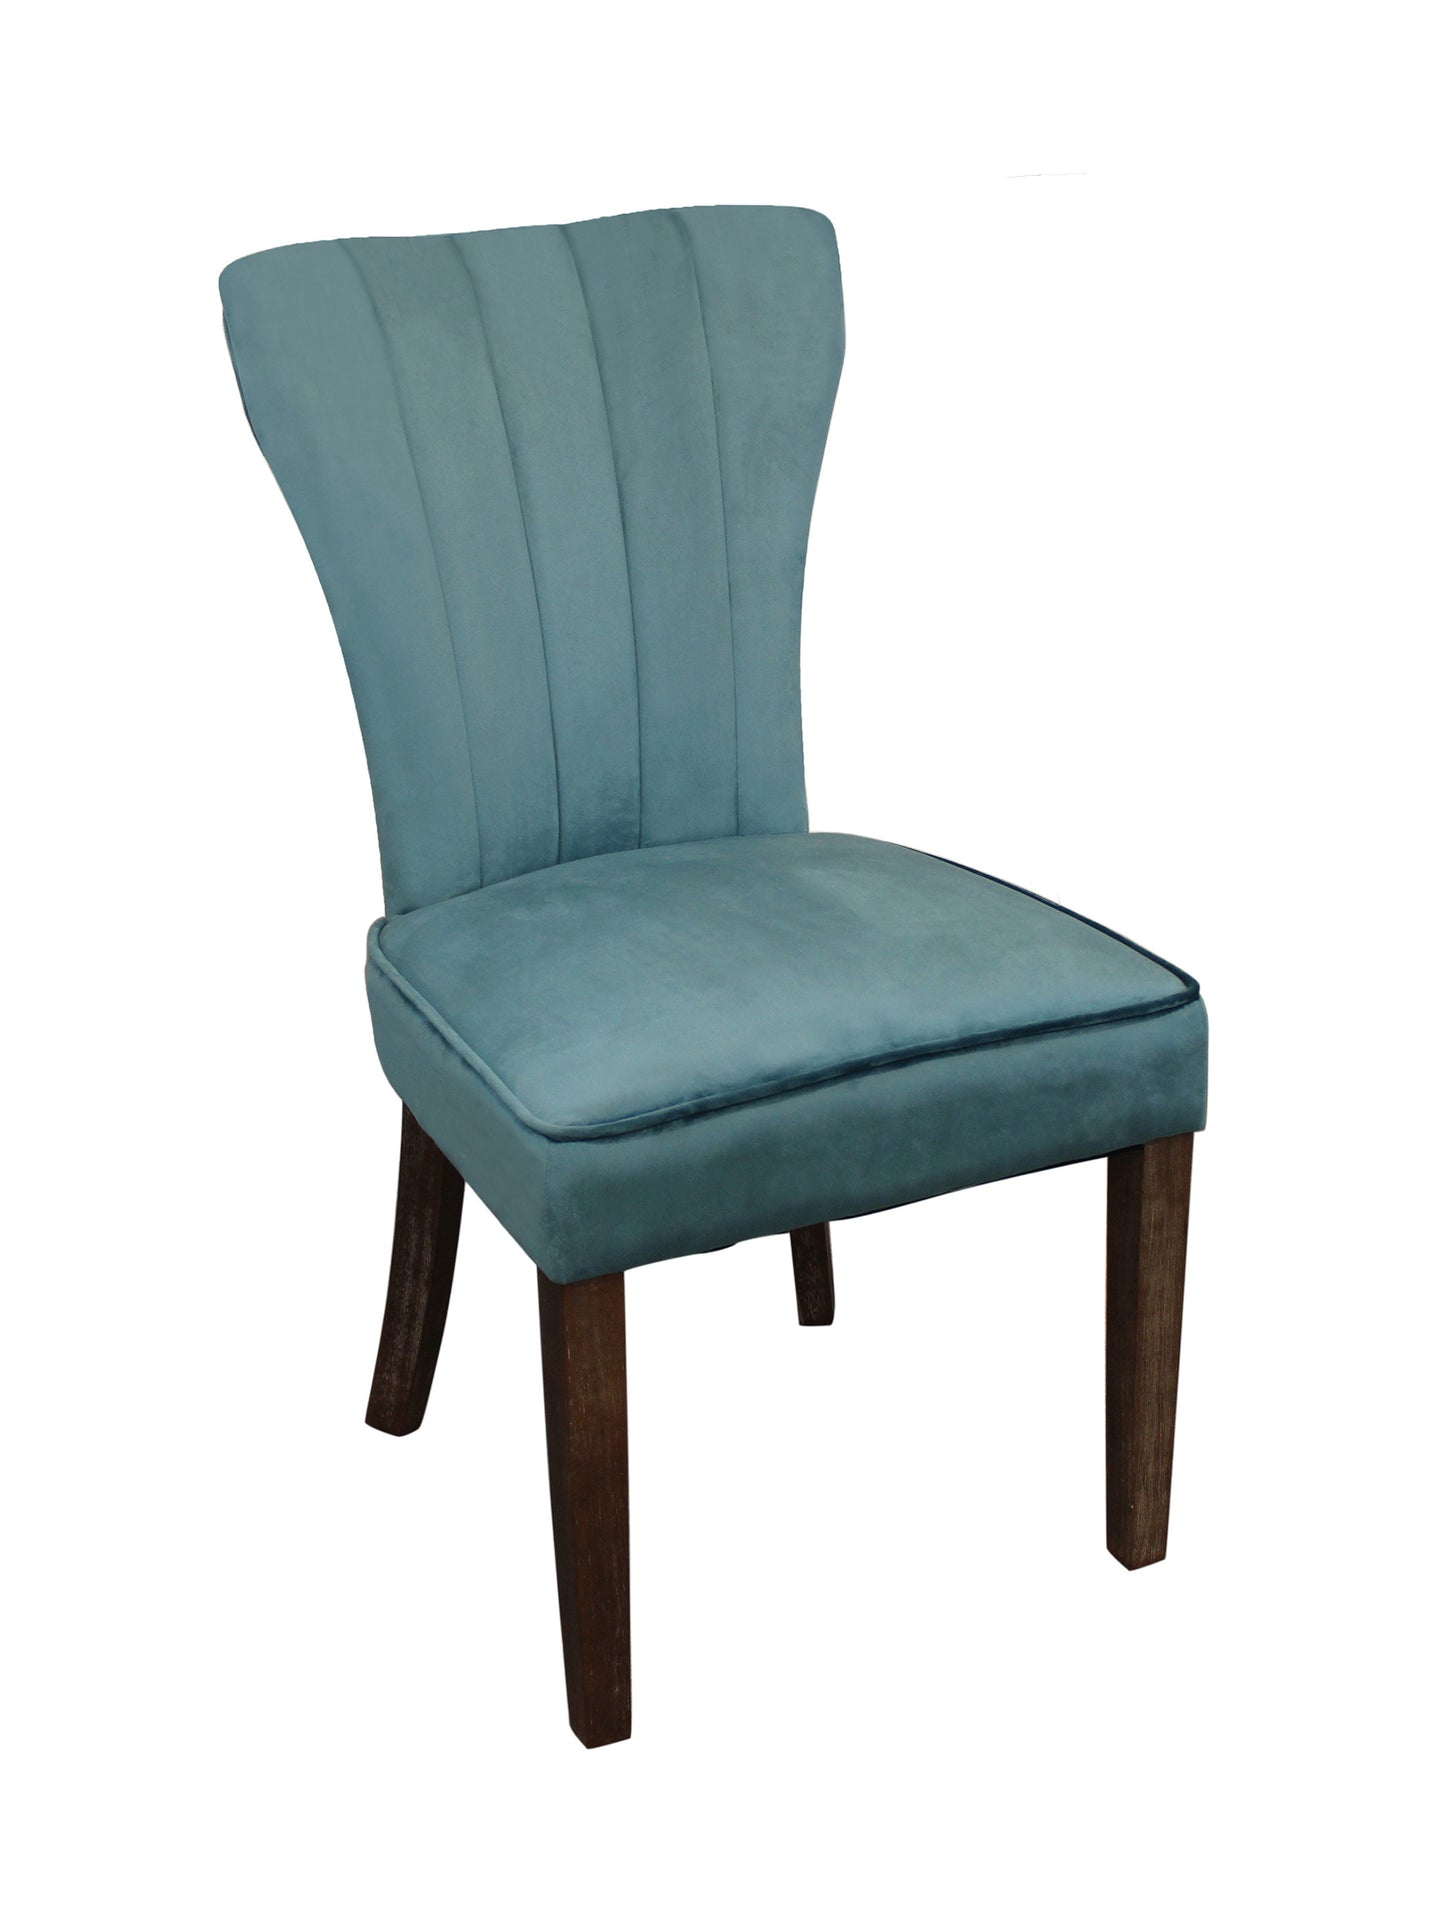 Eclectic Home Dining Chair Clive Teal